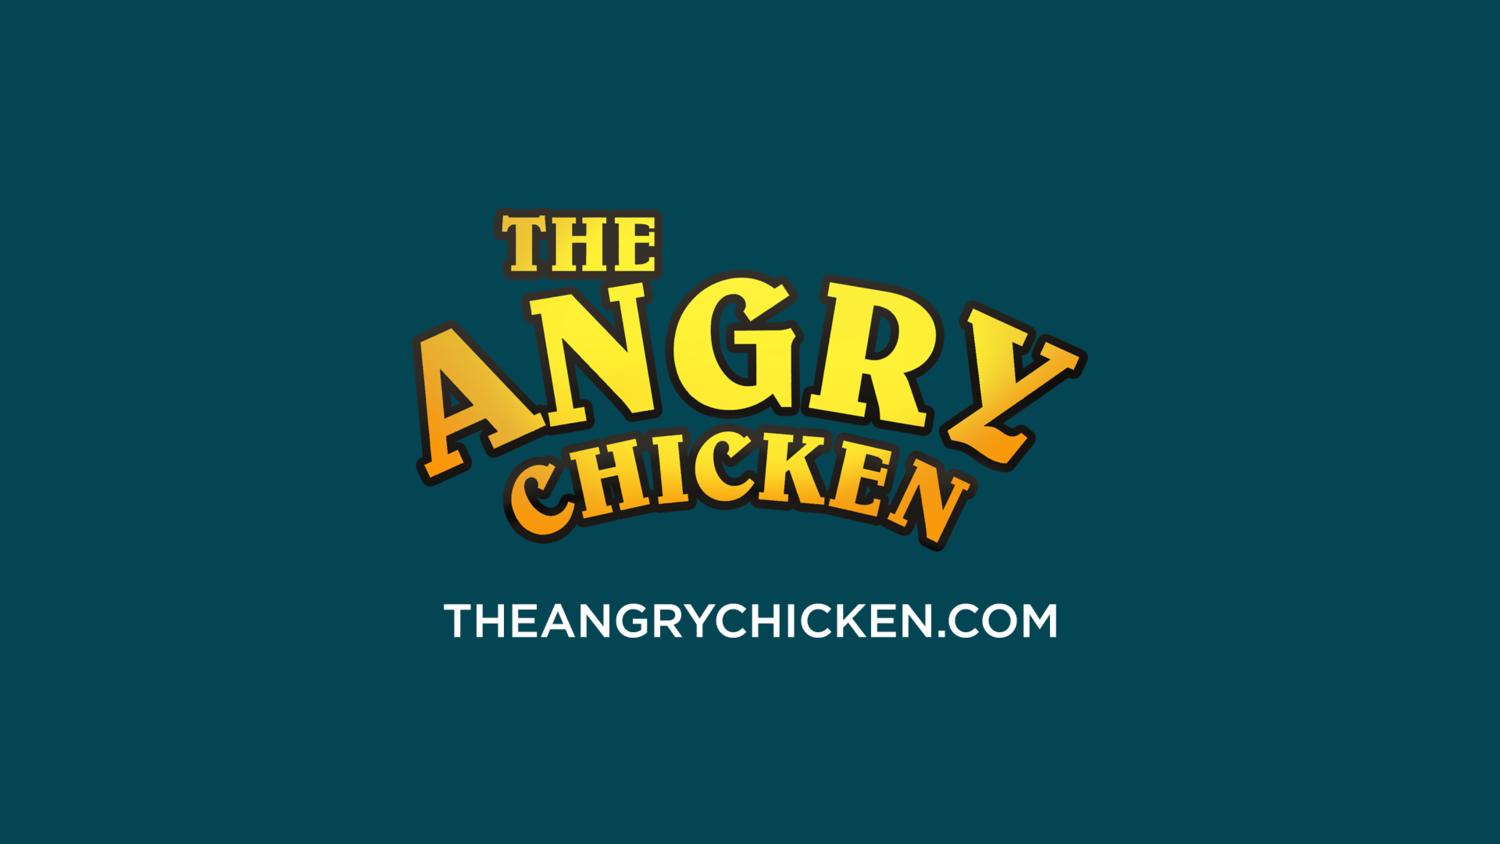 #451 - The Angry Chicken: “Aka-whatever-the-cluck”